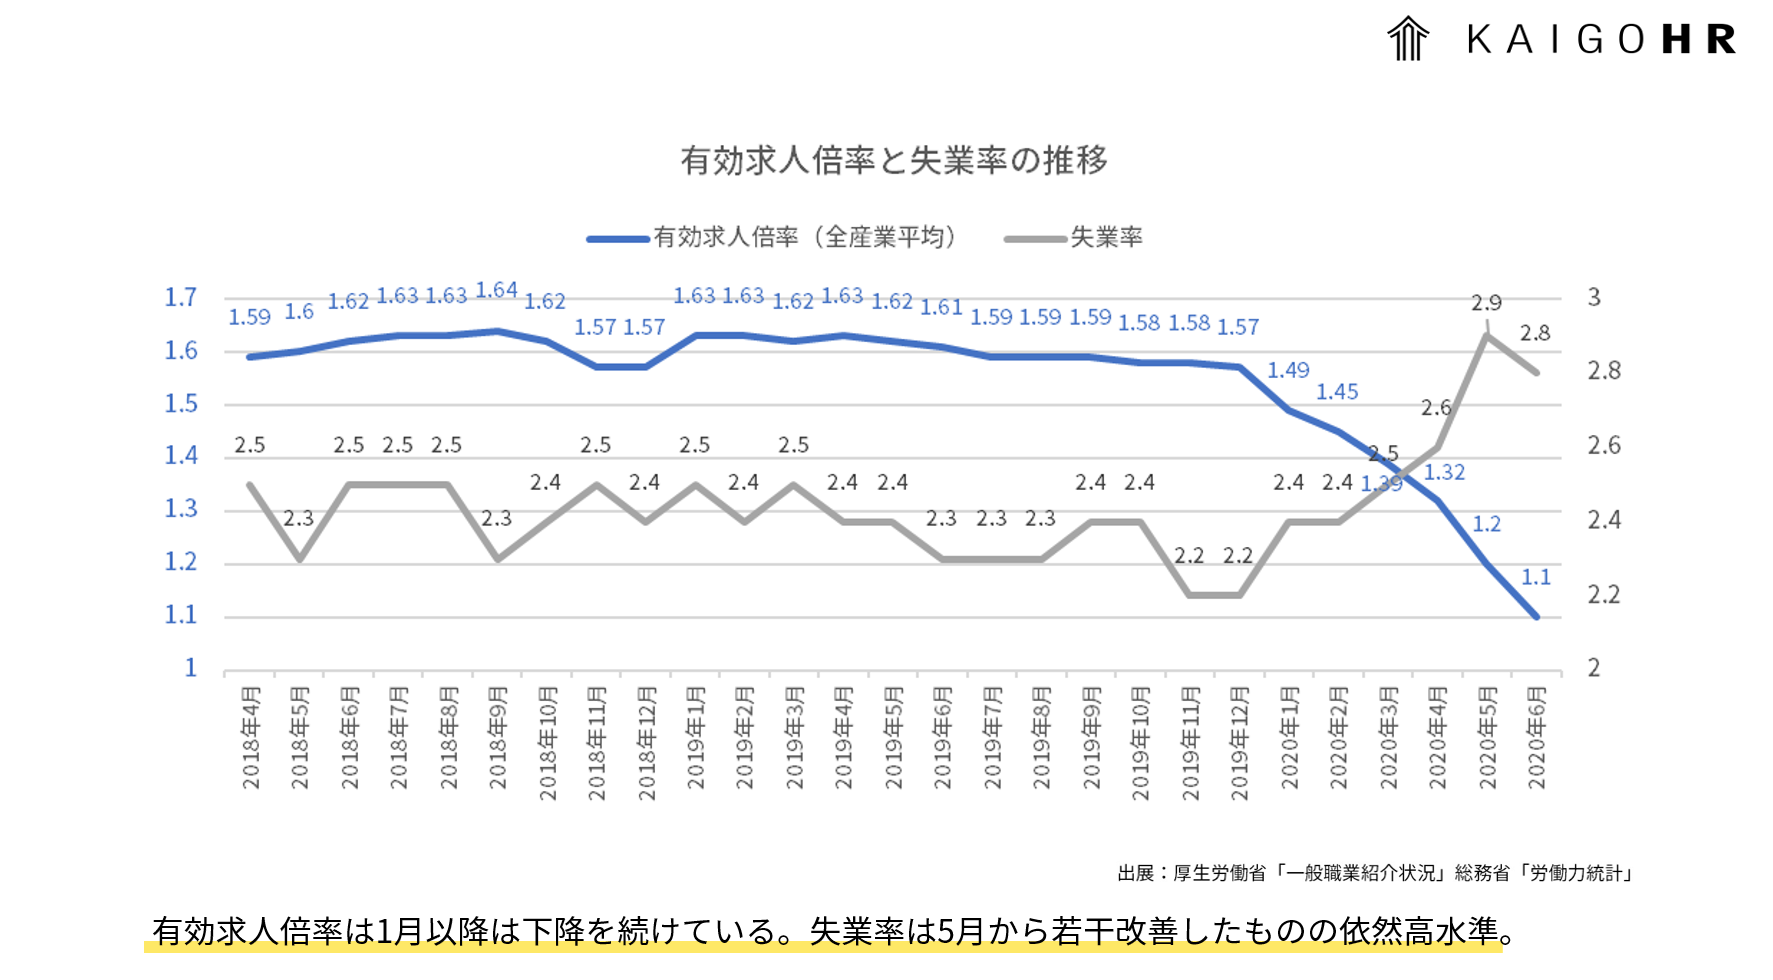 hr-data2006-02.PNG